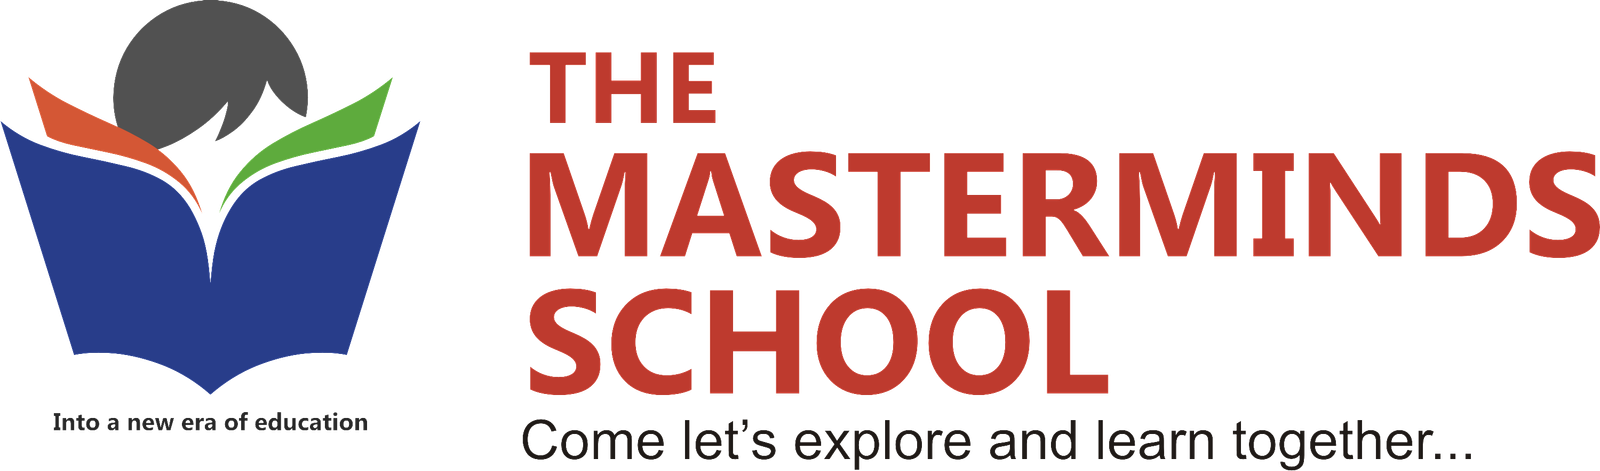 THE MASTERMINDS School